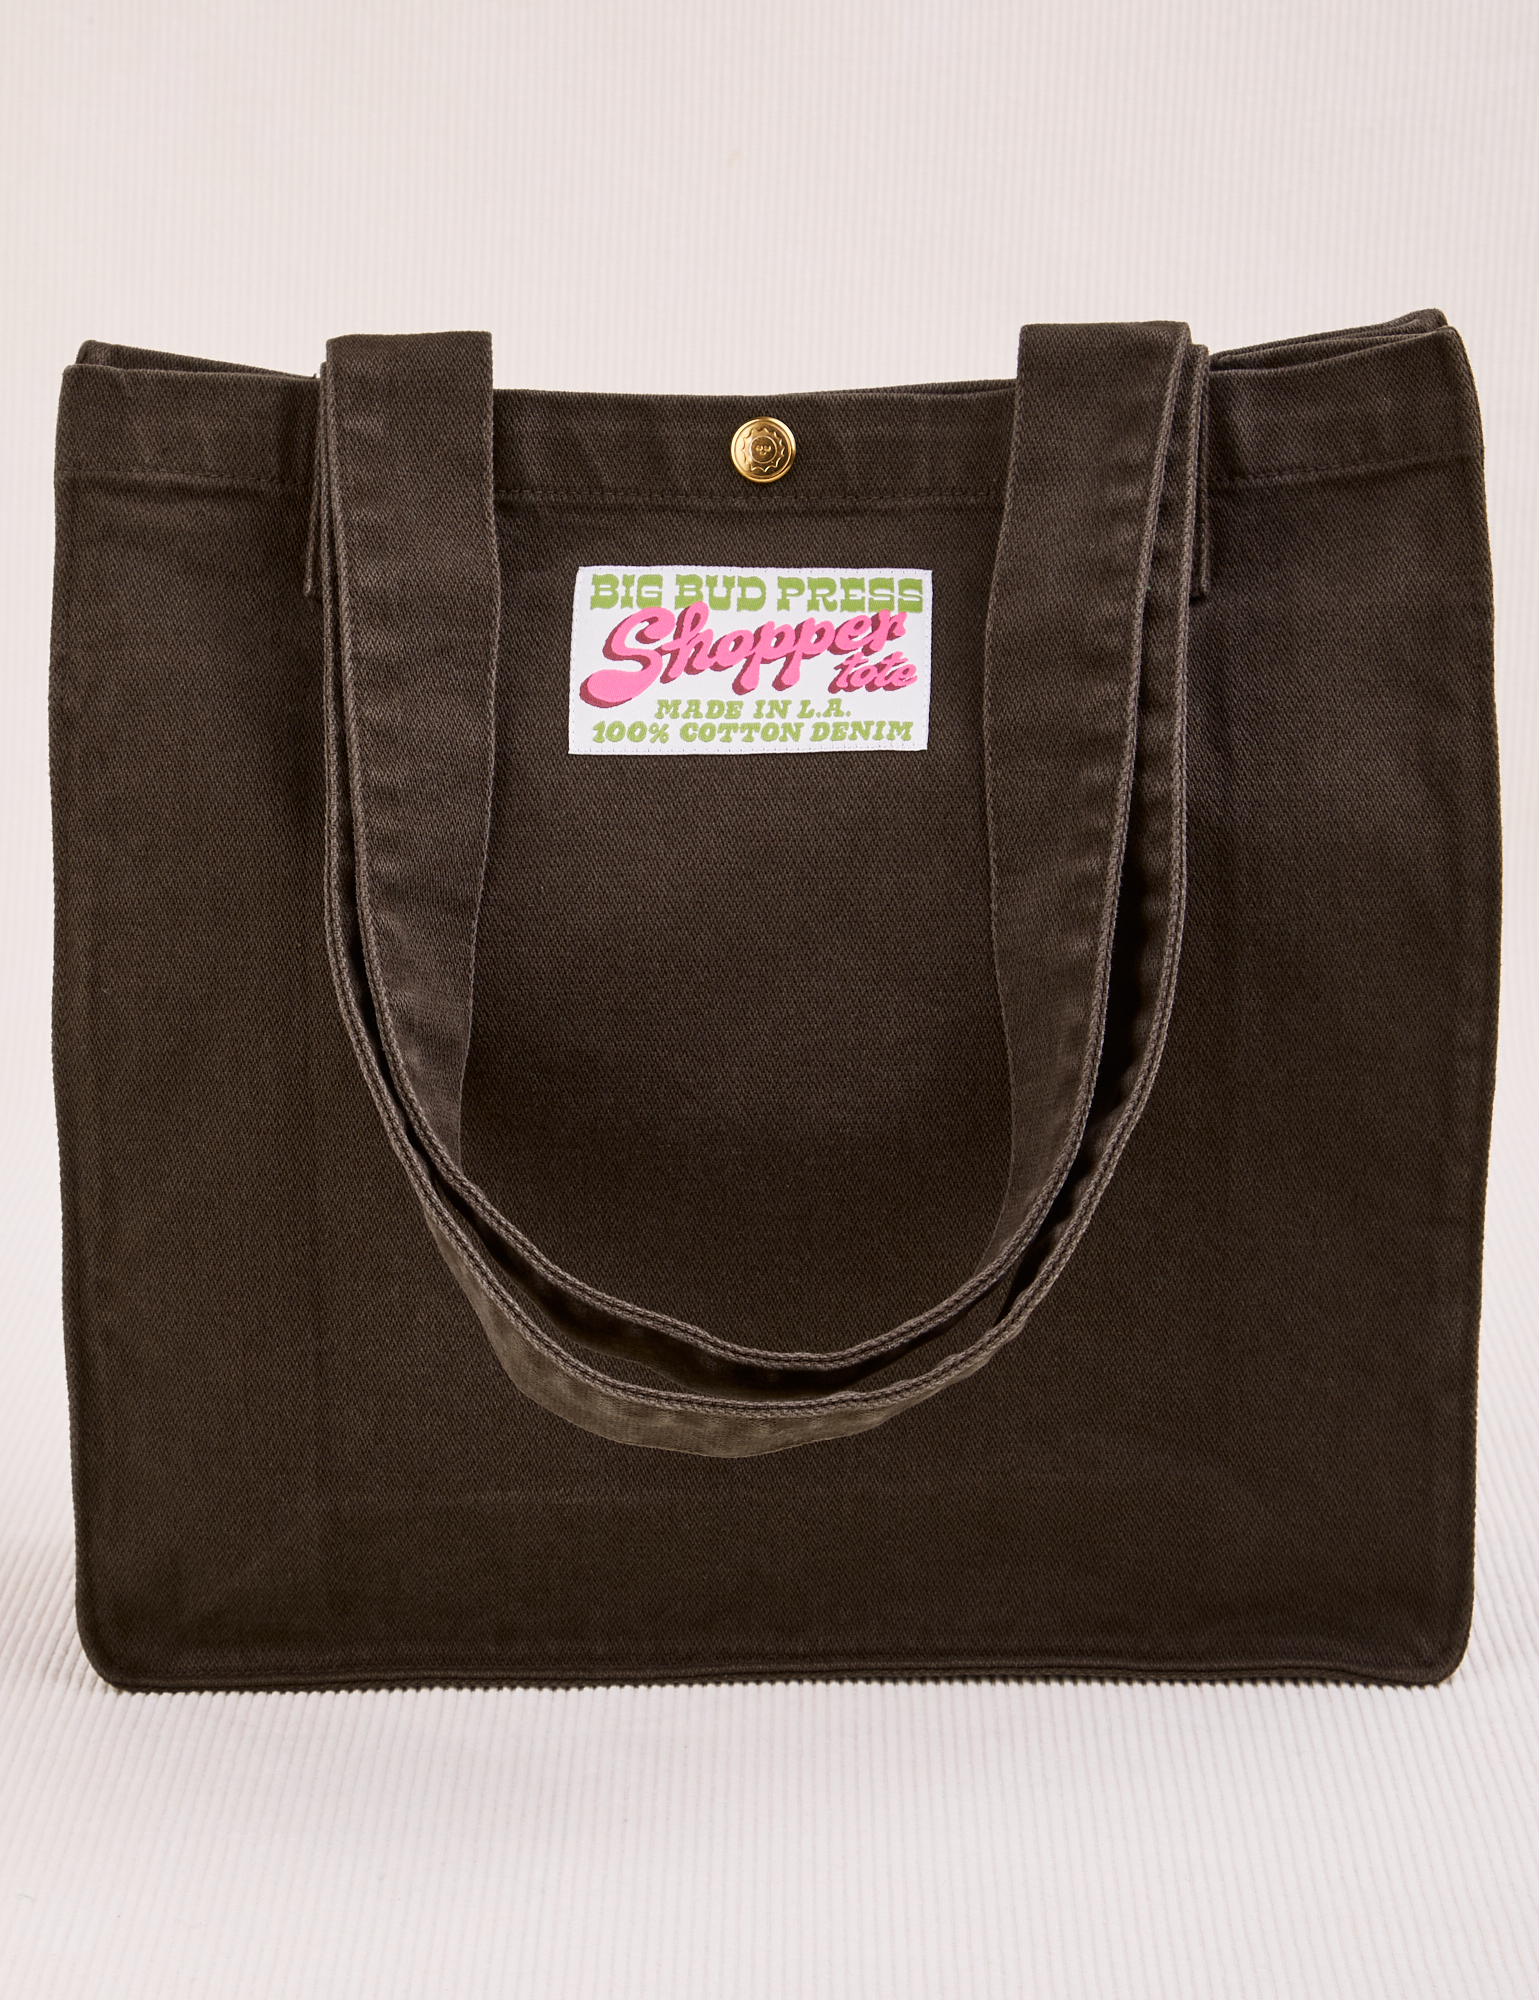 Shopper Tote Bag in Espresso Brown with straps hanging down front of bag